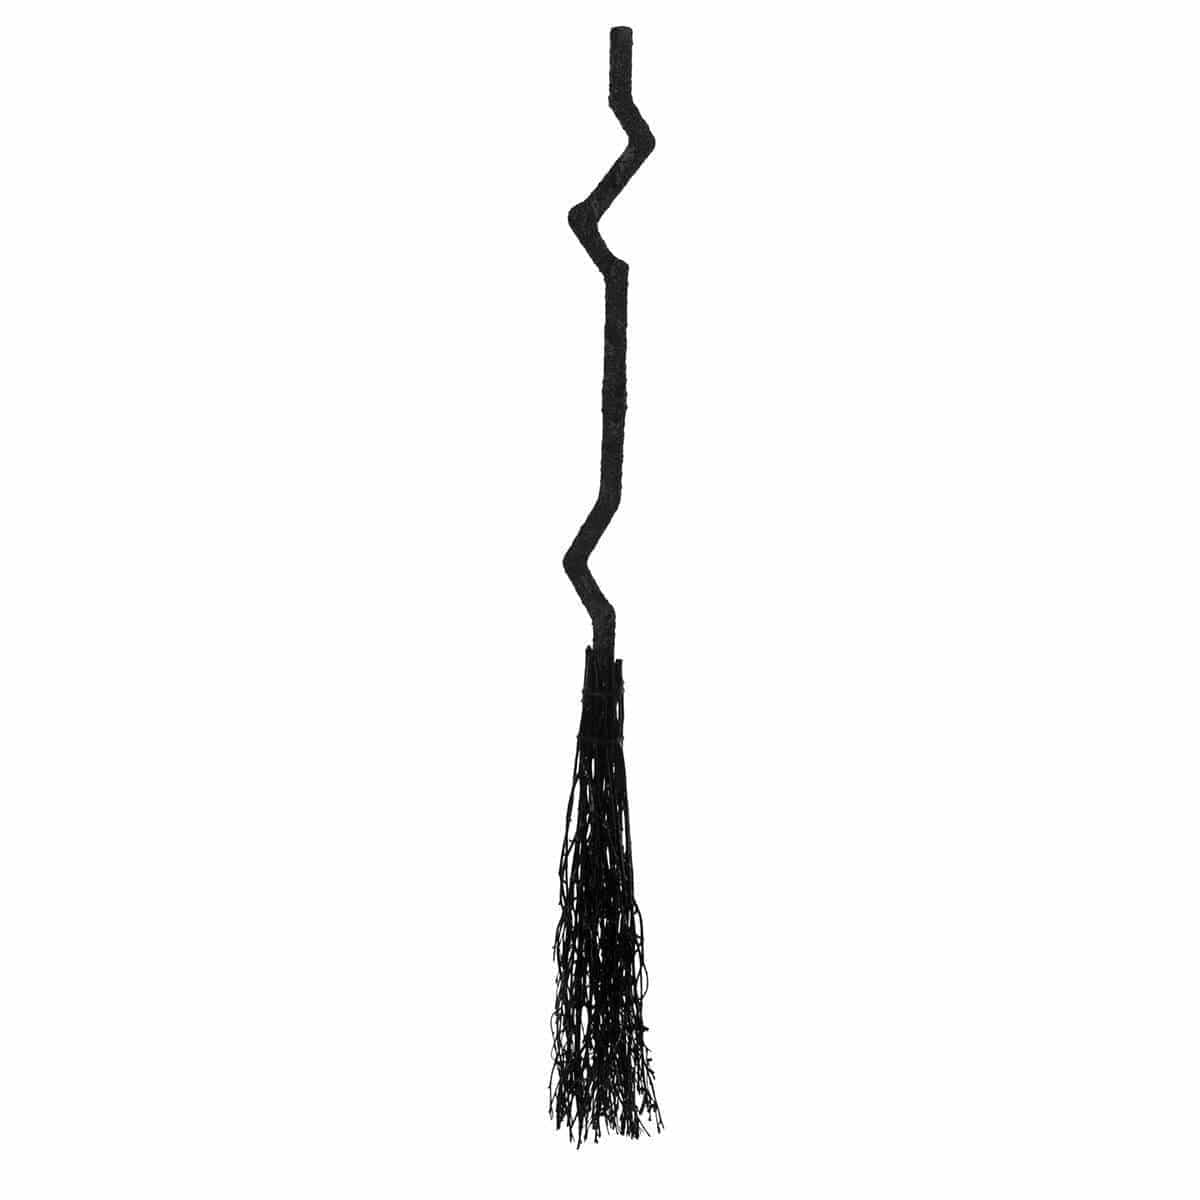 Buy Costume Accessories Black crooked broom sold at Party Expert